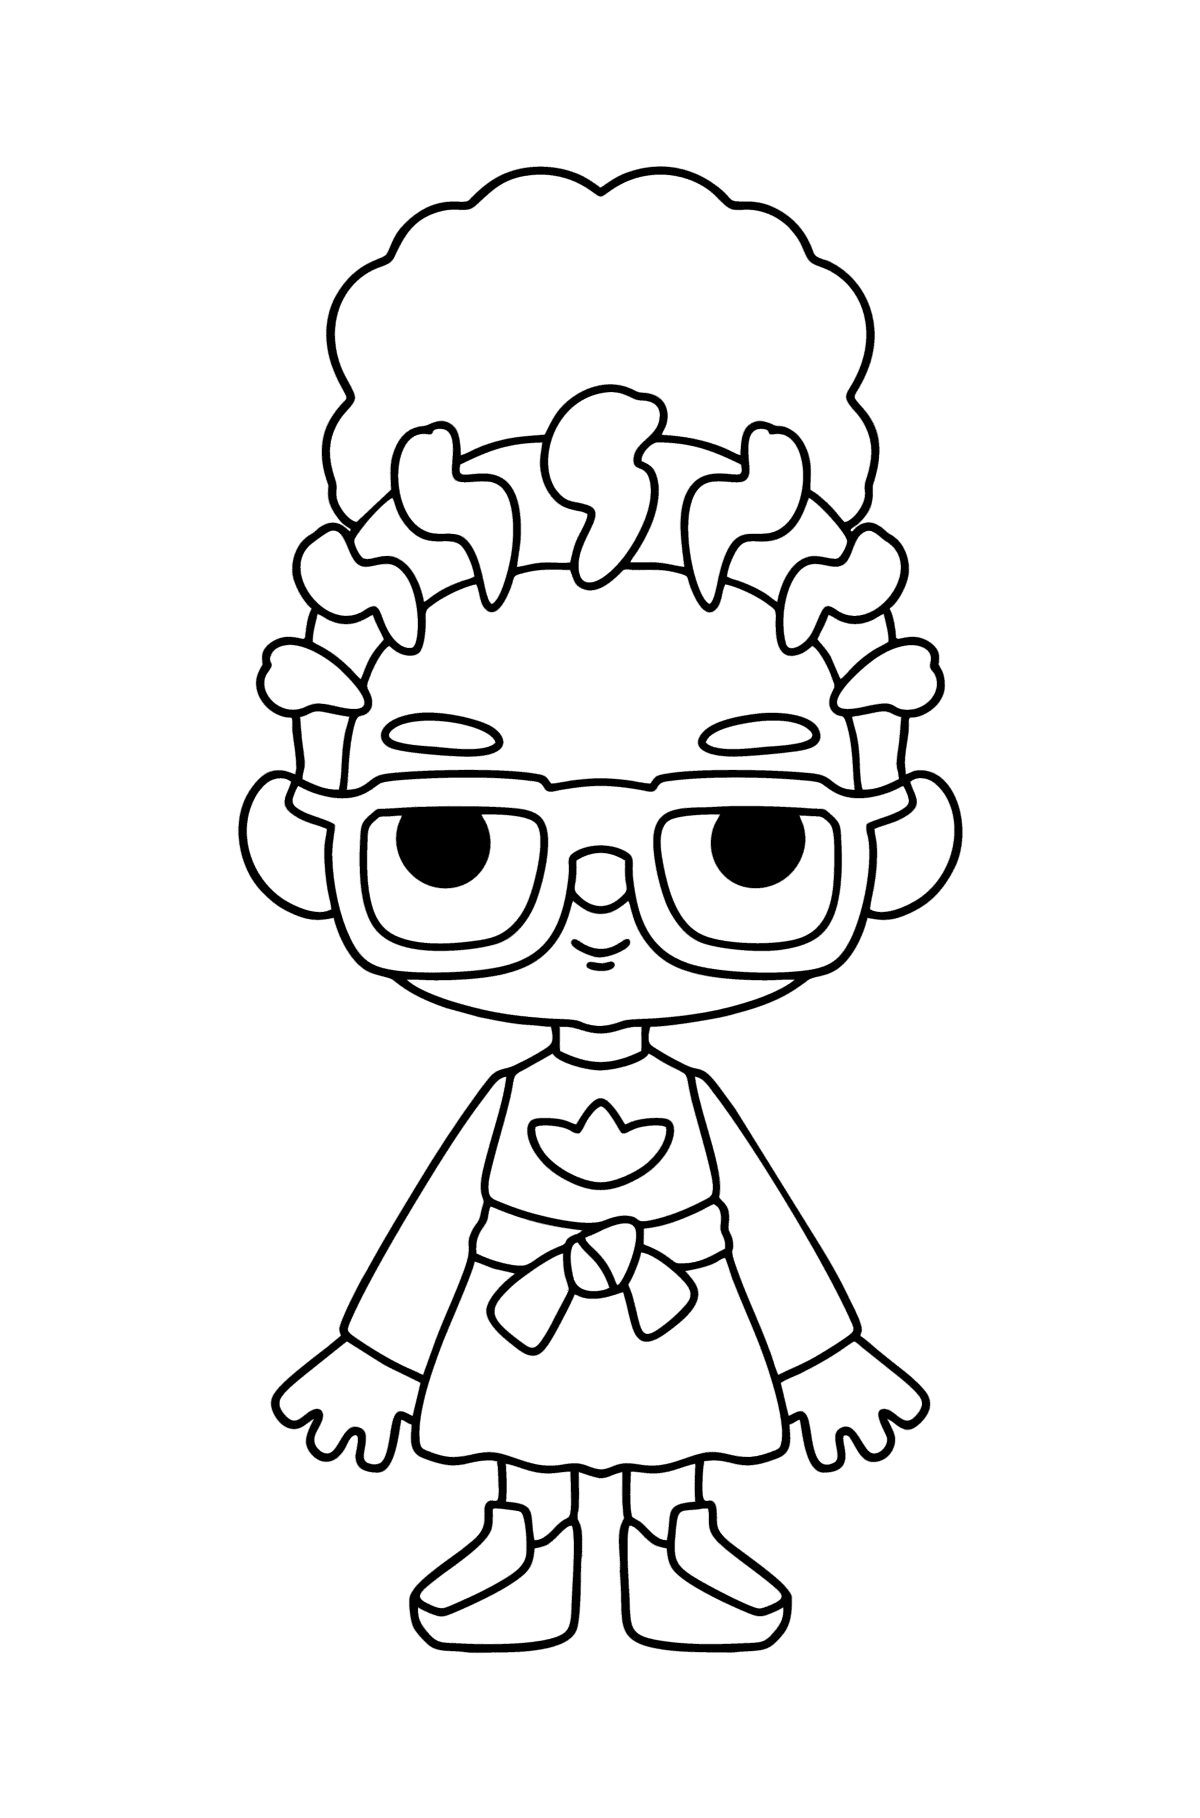 Coloring page Girl tocaboca 02 - Coloring Pages for Kids